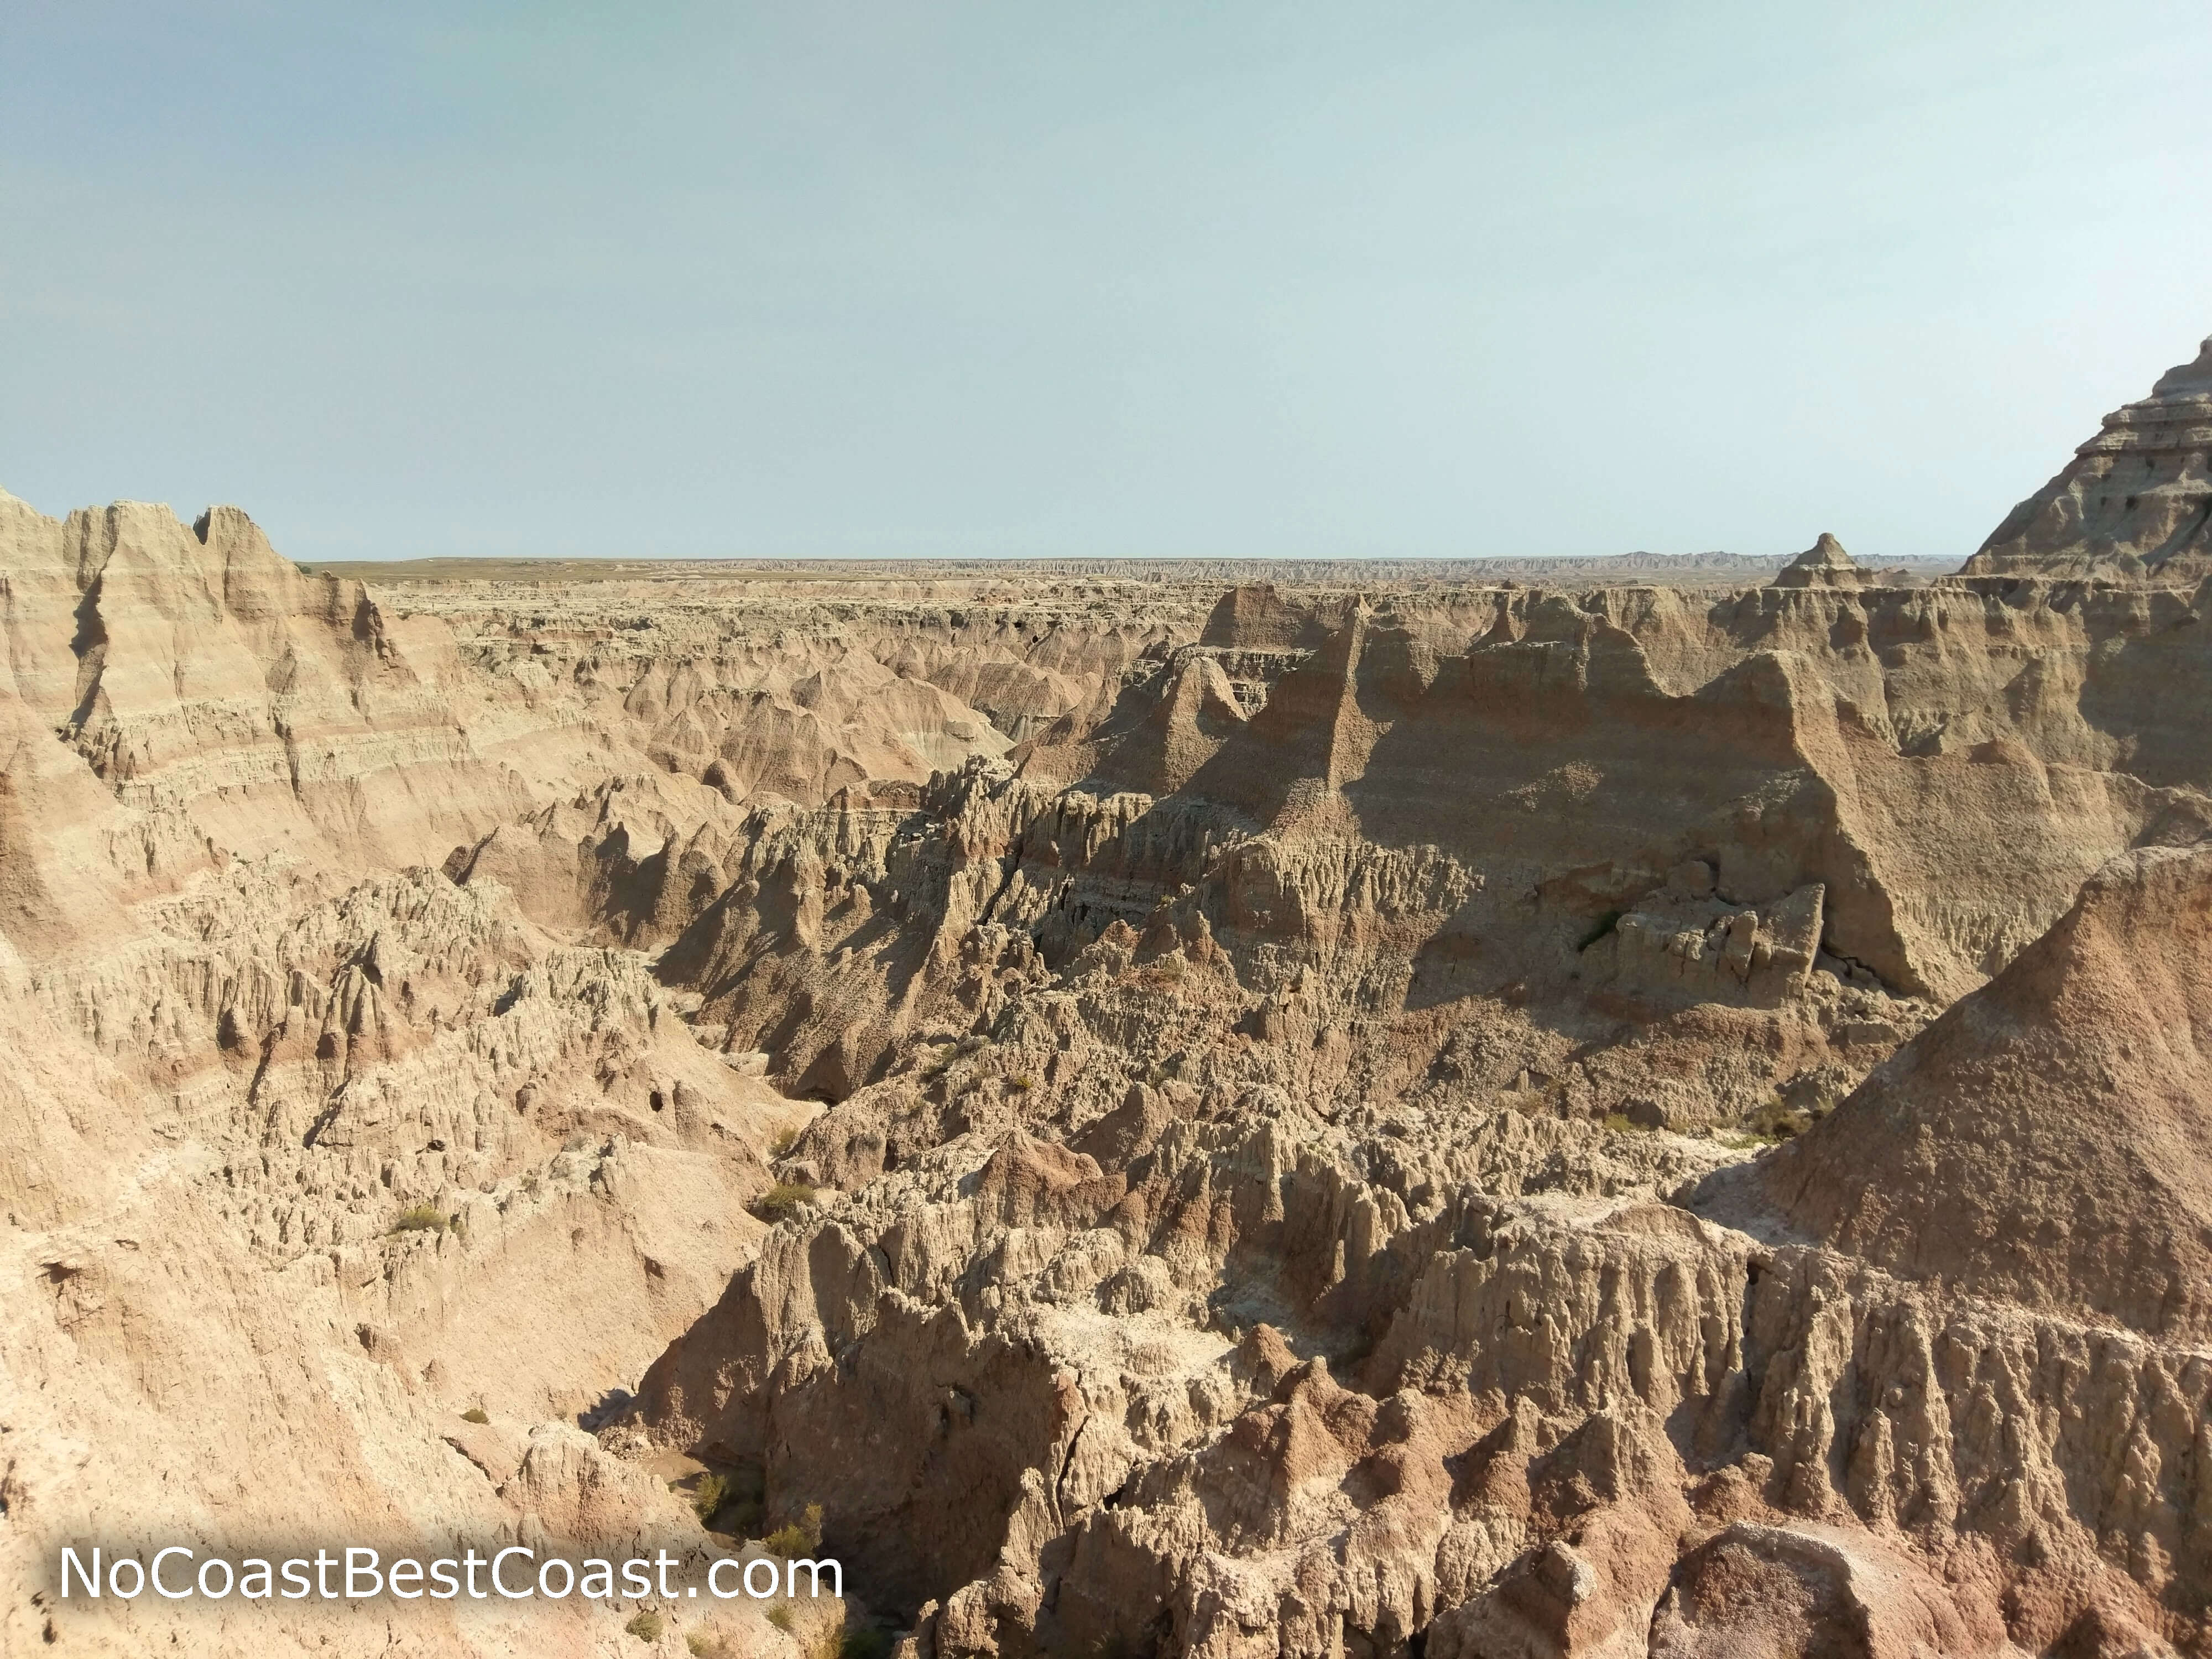 The Window provides you astounding views of badlands rock formations